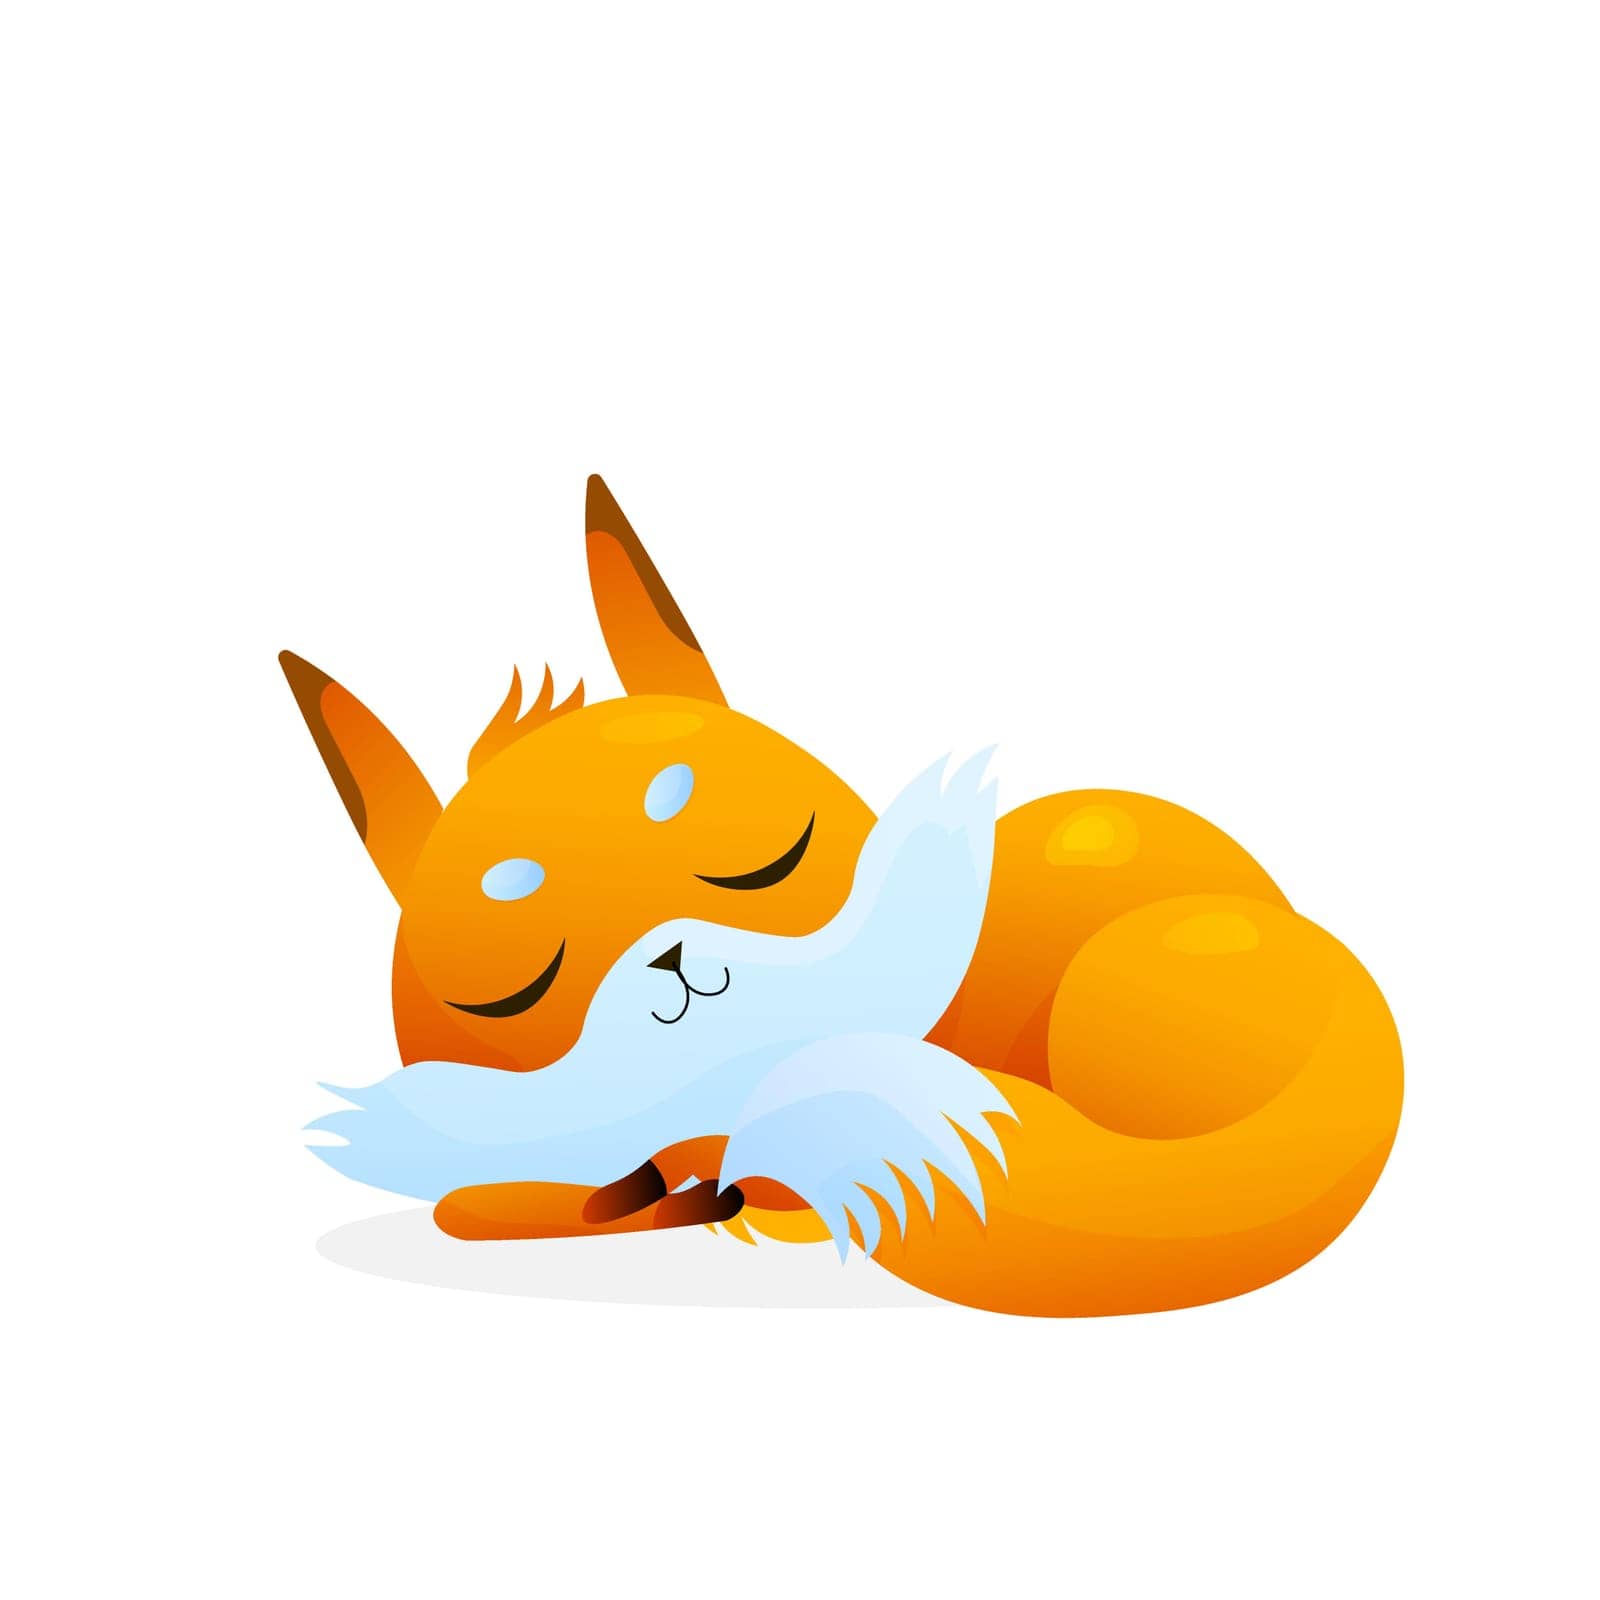 Cute cartoon slepping fox on white background. For nature concepts, children s books illustrating, printing materials Vector illustration with simple gradients.